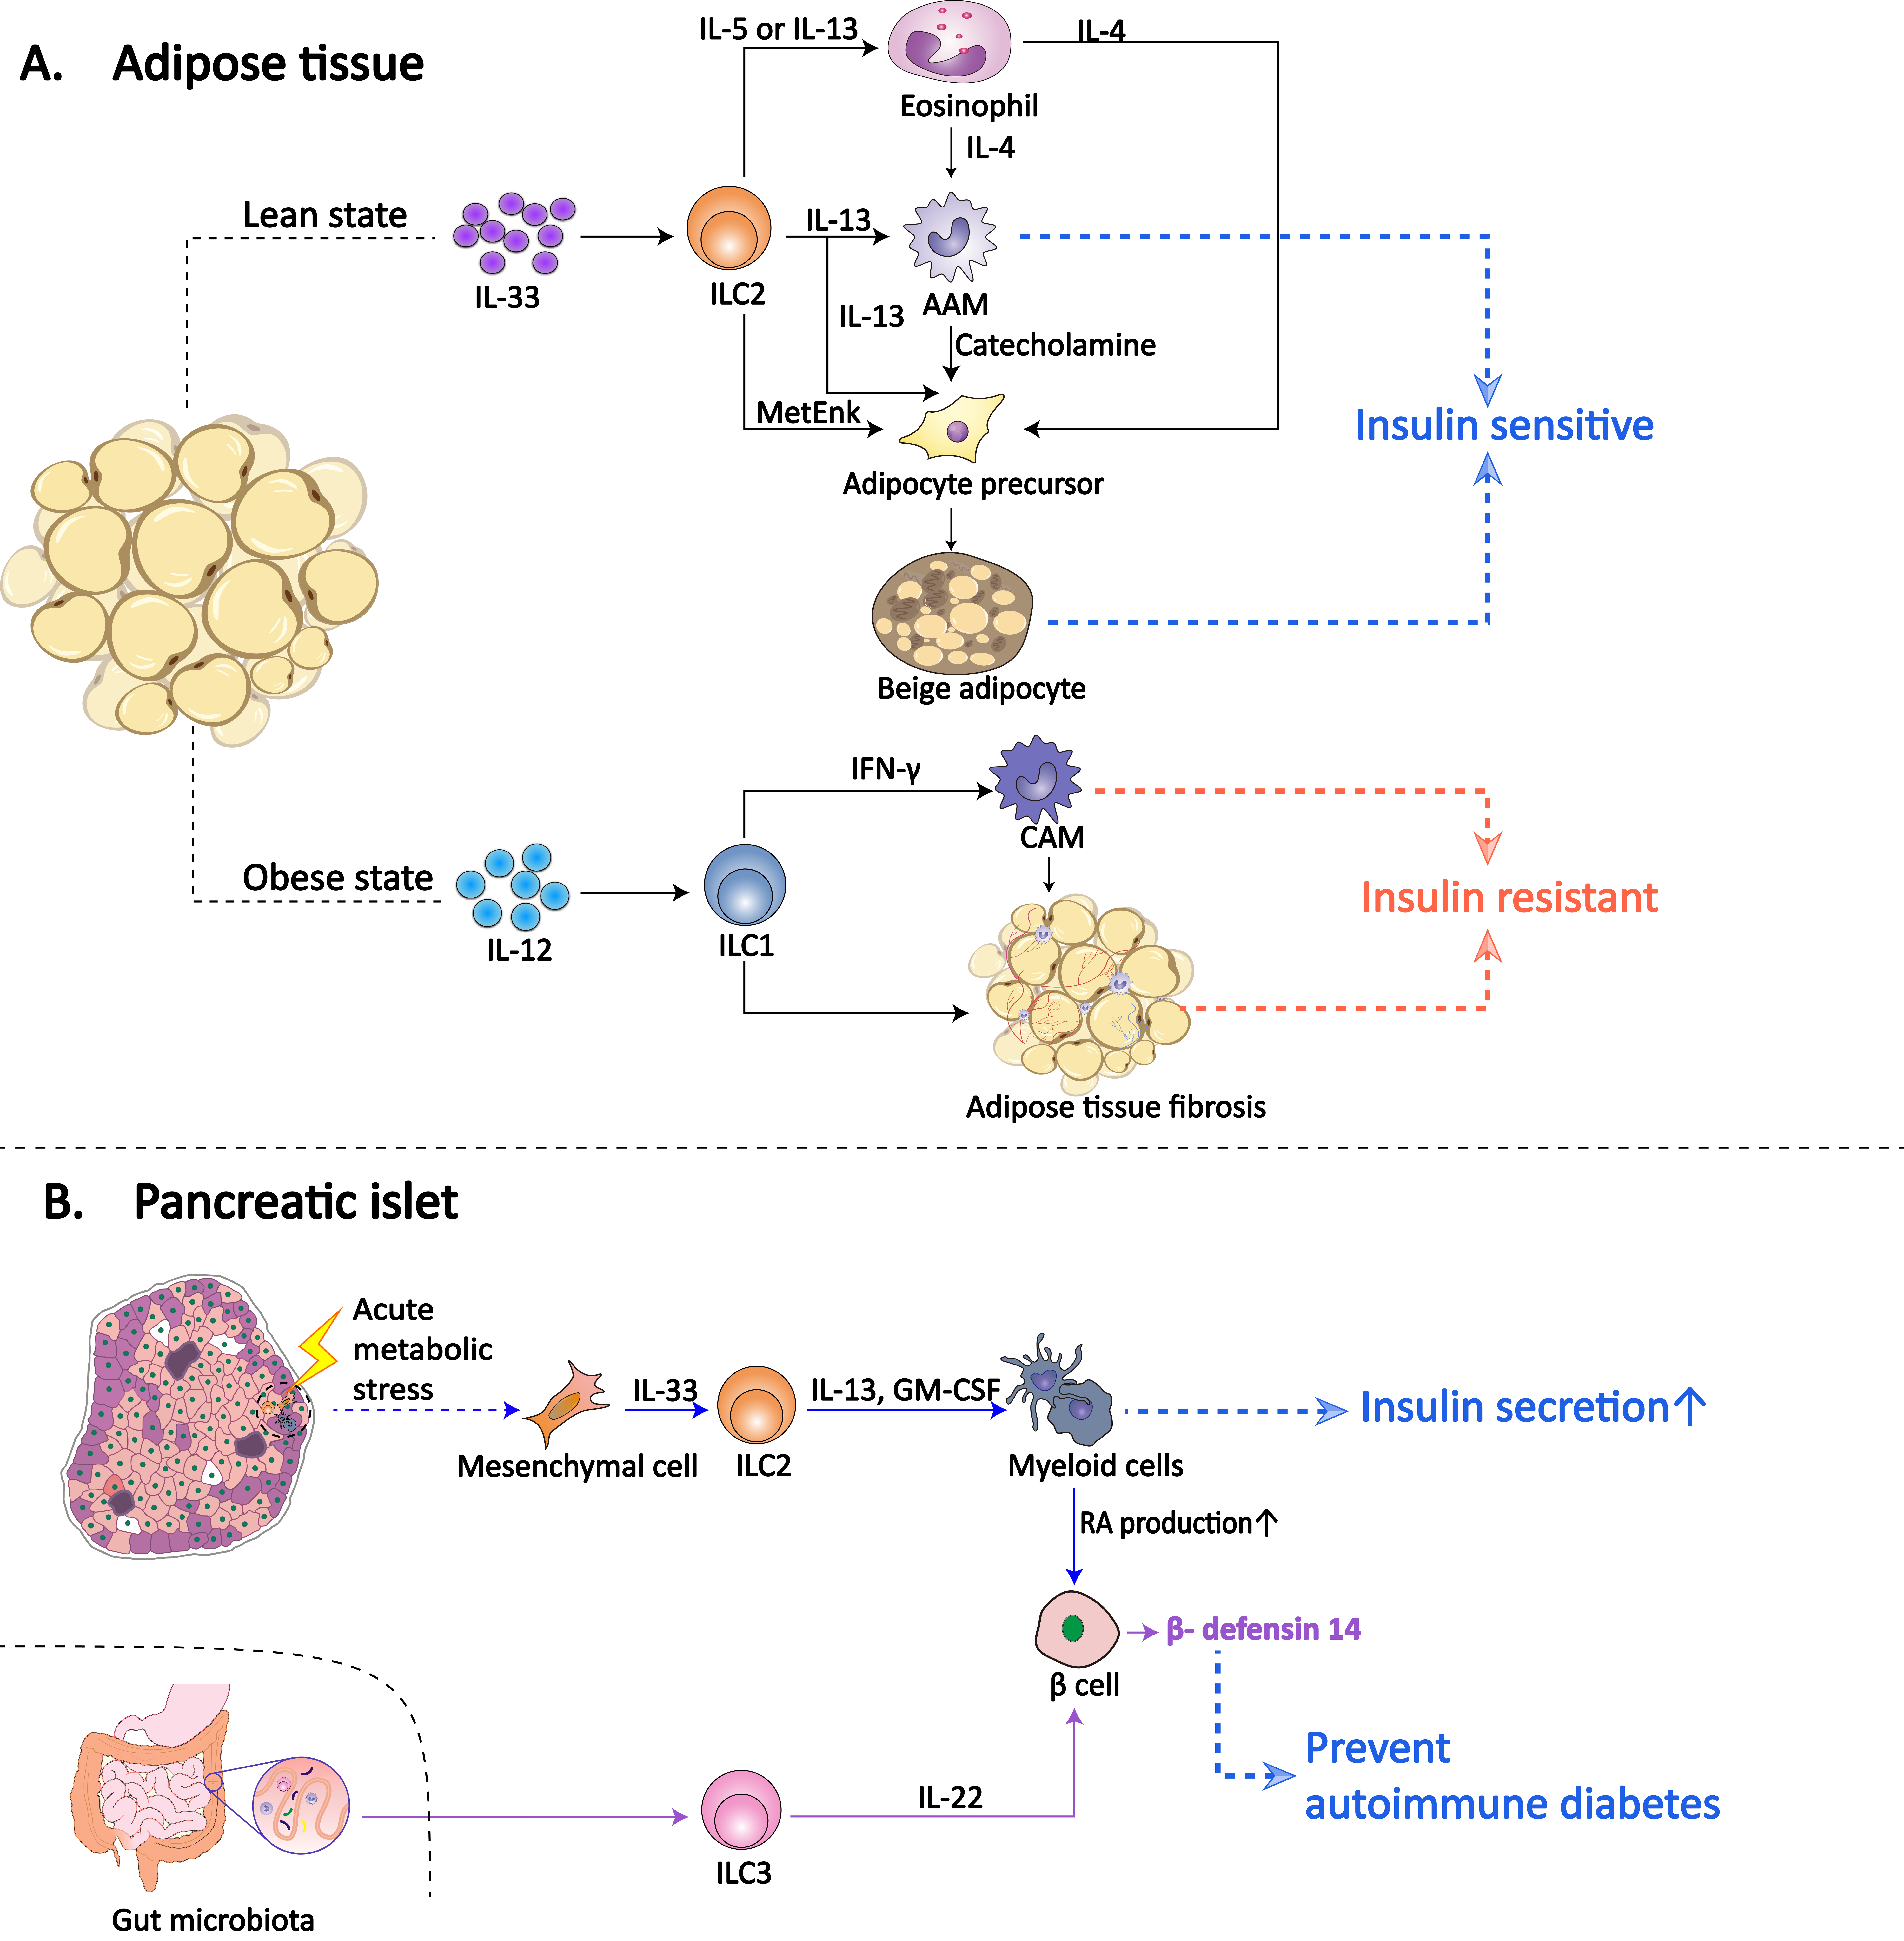 Figure 2. Role of ILCs in diabetes mellitus A | ILCs in adipose tissue. In the lean state, IL-33 induces adipose-resident ILC2s to produce the cytokines IL-5 or IL-13, which support the recruitment and accumulation of eosinophils in AT. Eosinophils produce IL-4 to sustain and recruit AAMs. ILC2s produce ample IL­13 and may also directly contribute to AAM recruitment and maintenance. AAM byproducts, such as IL-10, contribute to adipocyte insulin sensitivity and protect against DM. In addition, IL-4, IL-13 and methionine-enkephalin peptides (MetEnk) and catecholamines, produced by eosinophils, ILC2s and AAMs, respectively, promote the proliferation and differentiation of adipocyte precursors into beige adipocytes. Beige fat biogenesis also promotes insulin sensitivity and prevents DM. In the obese state, while IL-12 promotes the selective accumulation of adipose-resident ILC1s. ILC1s drive CAM polarization by IFN-γ production and promote AT fibrosis, contributing to obesity-associated insulin resistance and DM. B | ILCs in pancreatic islets. In diabetic or obese states, the islets are also in an inflammatory background. IL-33 is produced by mesenchymal cells as a stress signal in islets. As the main IL-33-responsive cells in islets, islet-resident ILC2s stimulate the capacity of myeloid cells to produce RA, which in turn enhances insulin secretion in islet β cells and protects against DM. In the gut, the microbiota controls IL-22 expression by ILC3s within pancreatic islets through different pathways. ILC3-derived IL-22 induces islet β cells to produce β-defensin, preventing autoimmune diabetes.